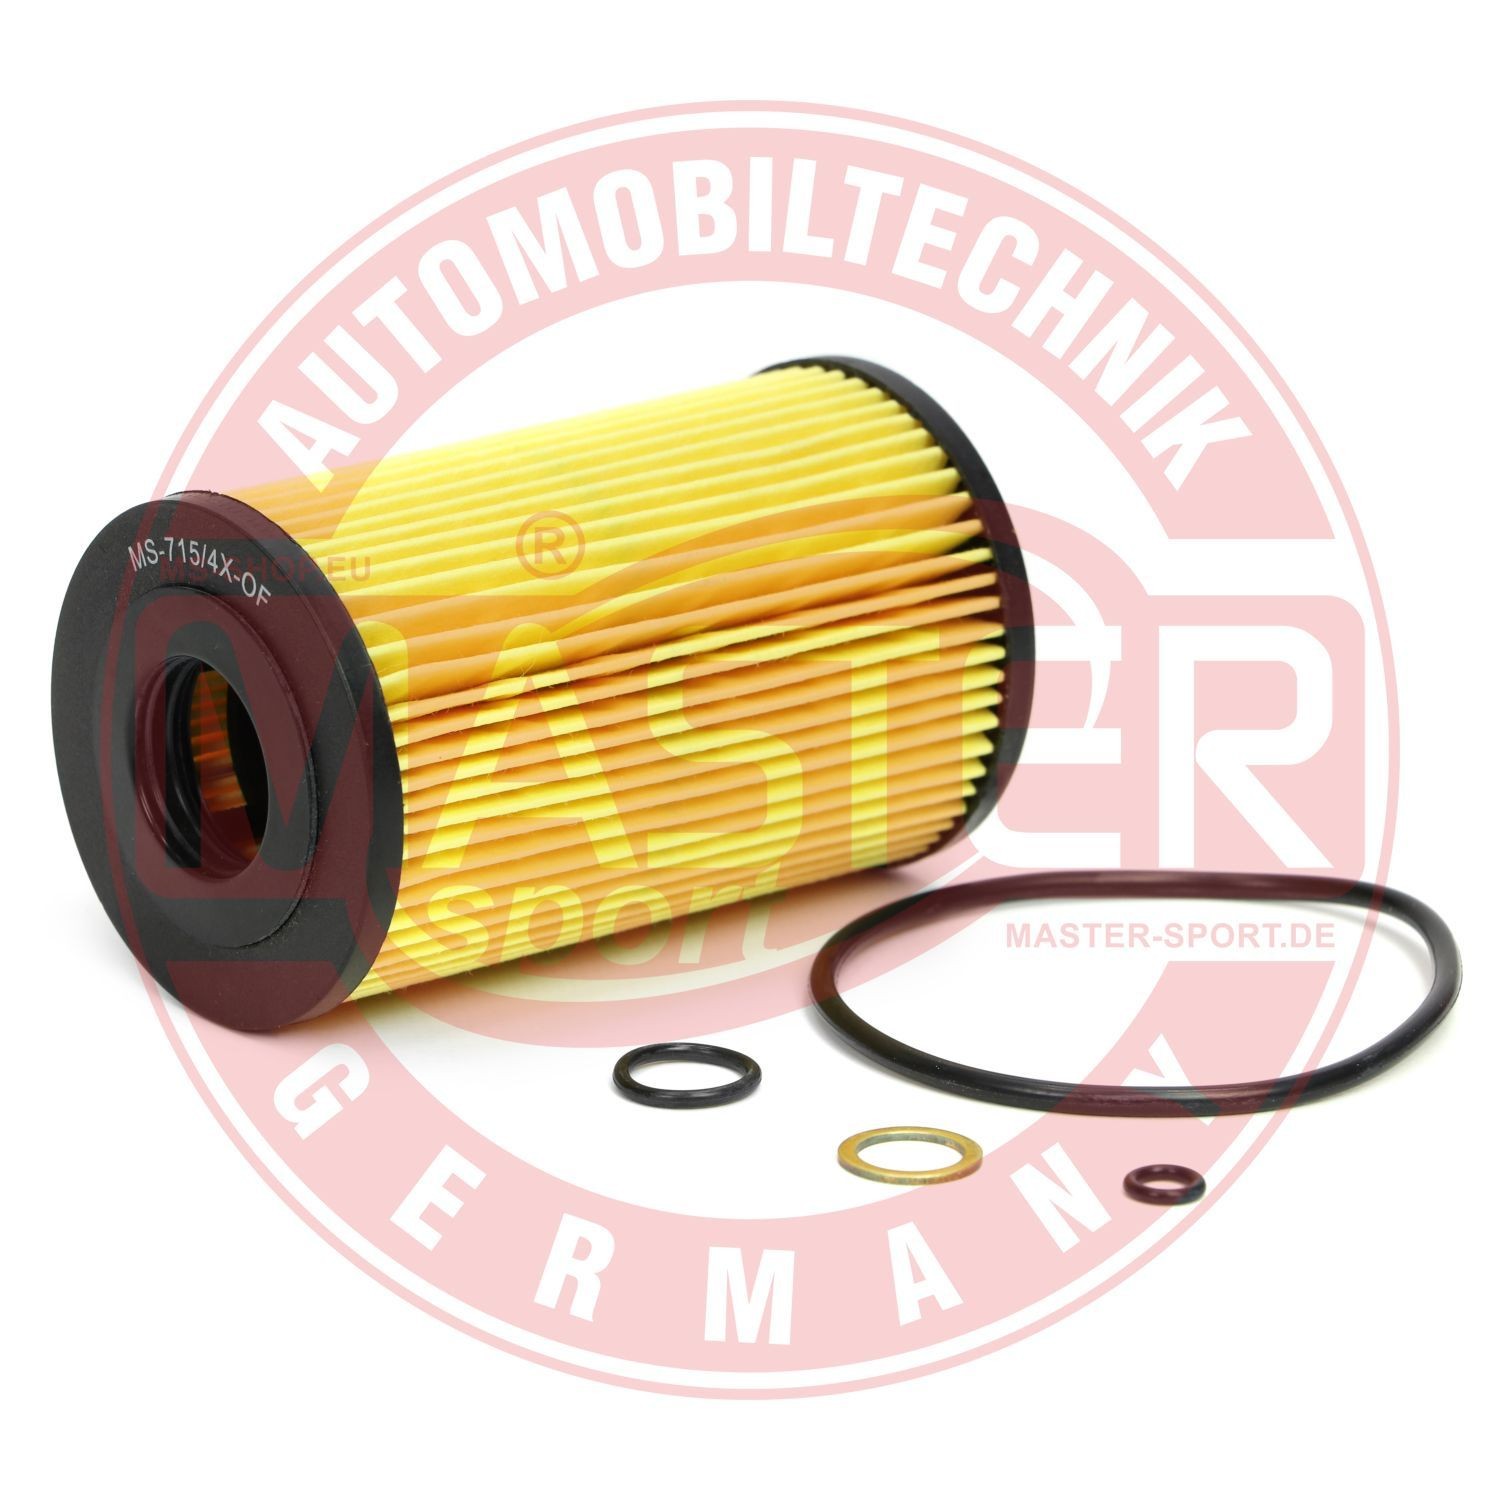 BMW 3 Series Engine oil filter 10160098 MASTER-SPORT 715/4X-OF-PCS-MS online buy